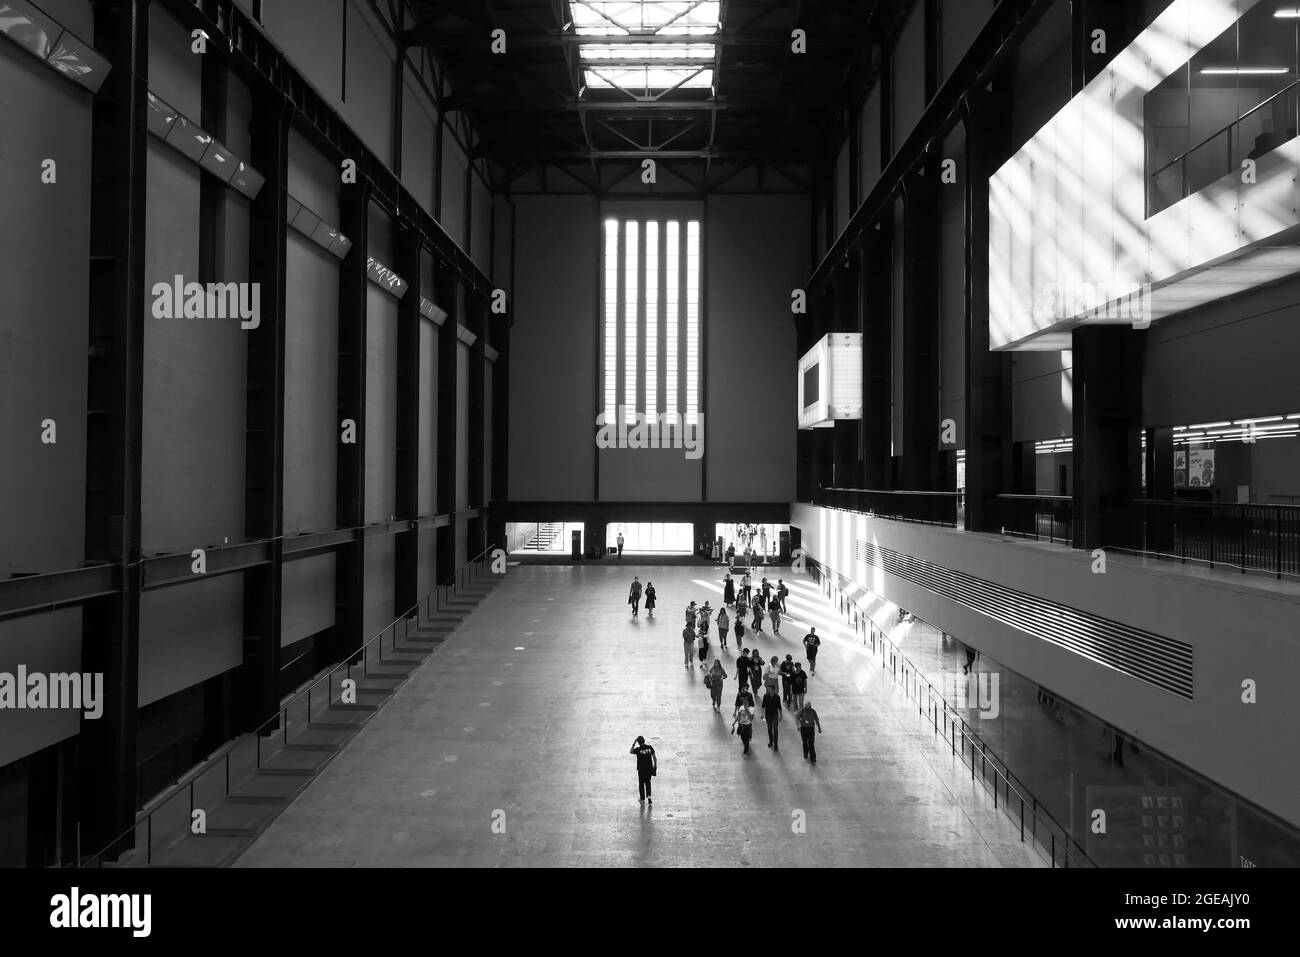 London, Greater London, England, August 10 2021: Visitors arriving at the entrance to the Tate Modern art gallery. Monochrome. Stock Photo